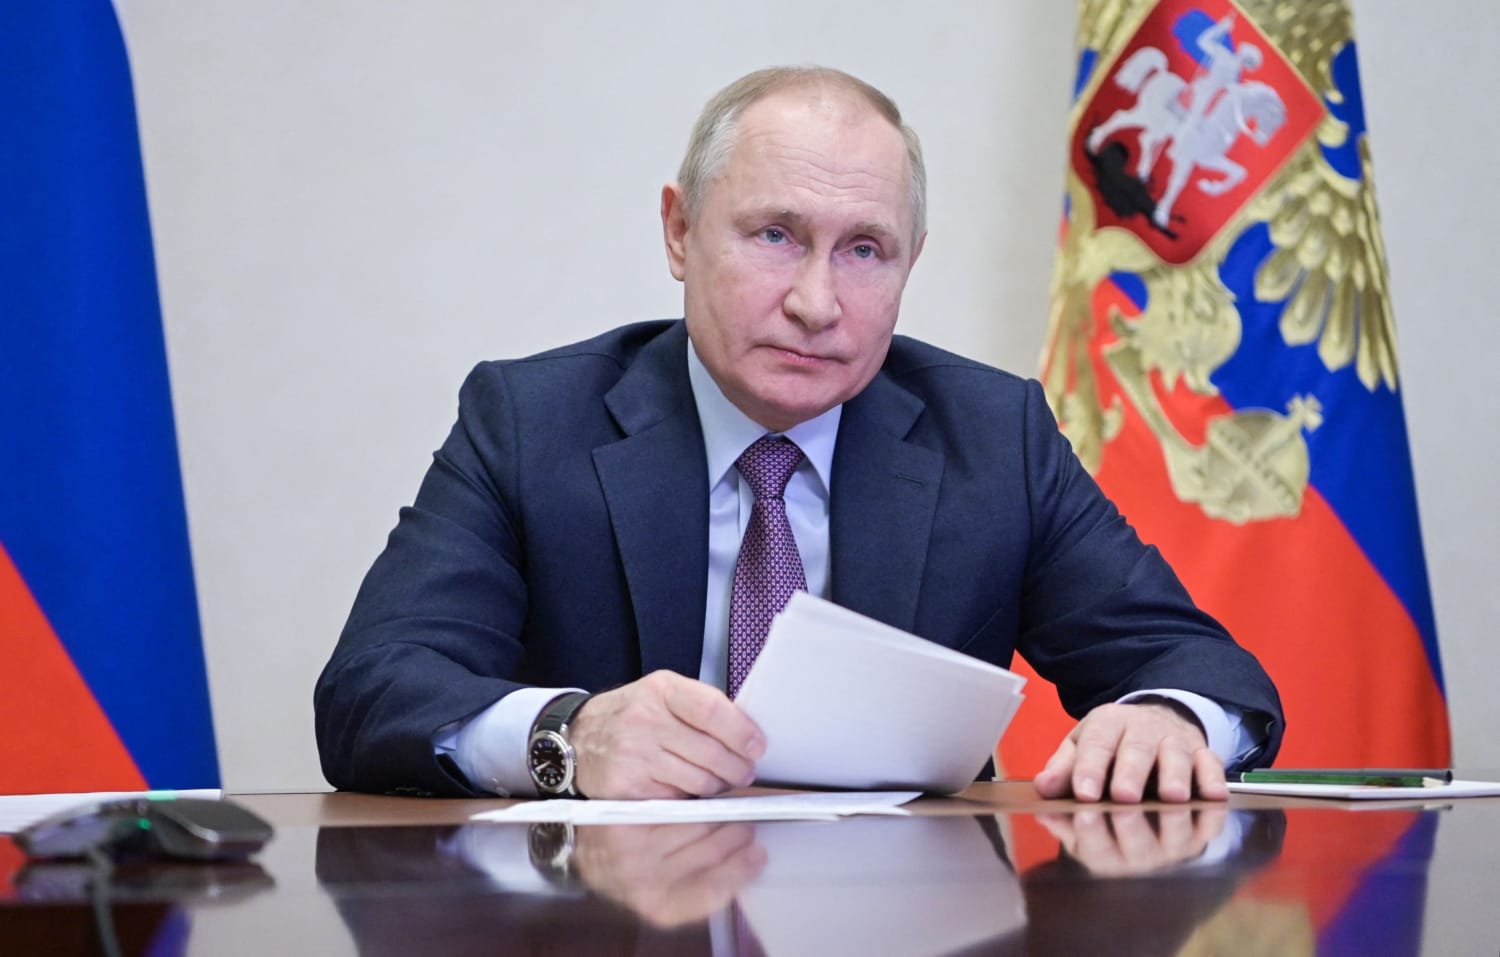 Putin to mull different options if West refuses guarantees over Ukraine